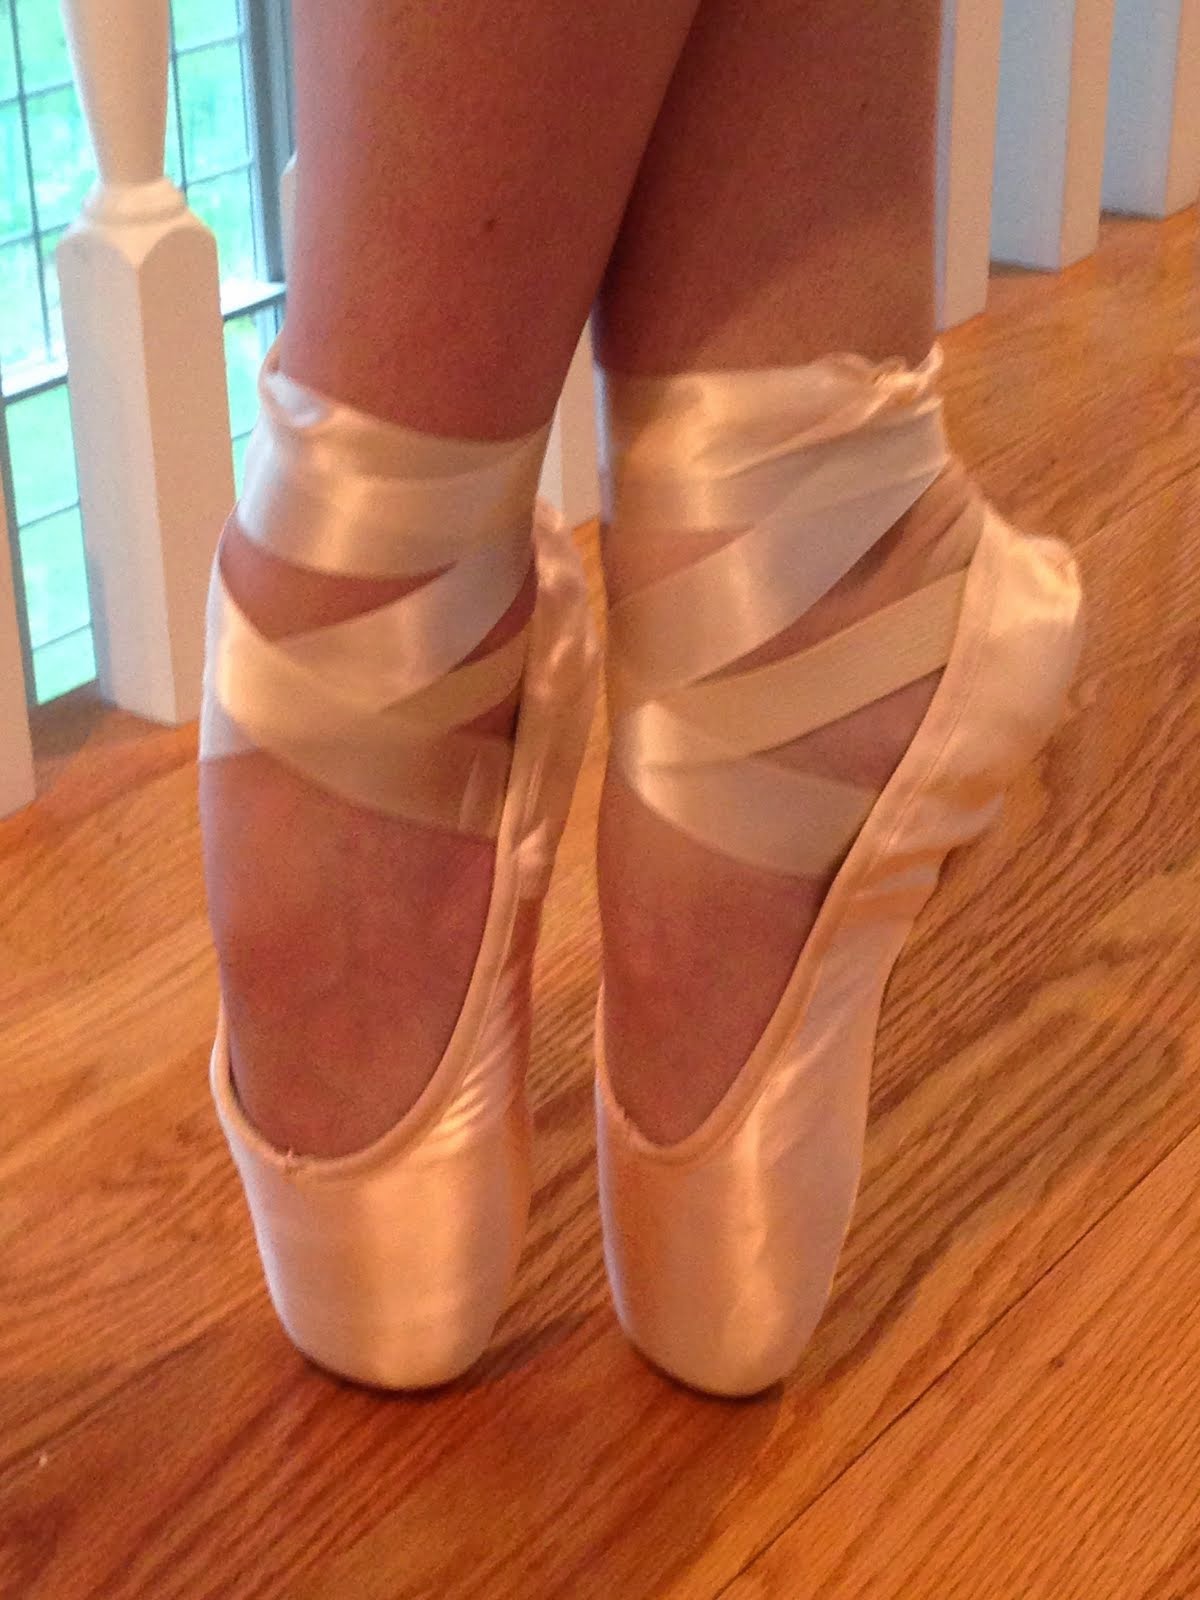 EN POINTE WITH SCOLIOSIS